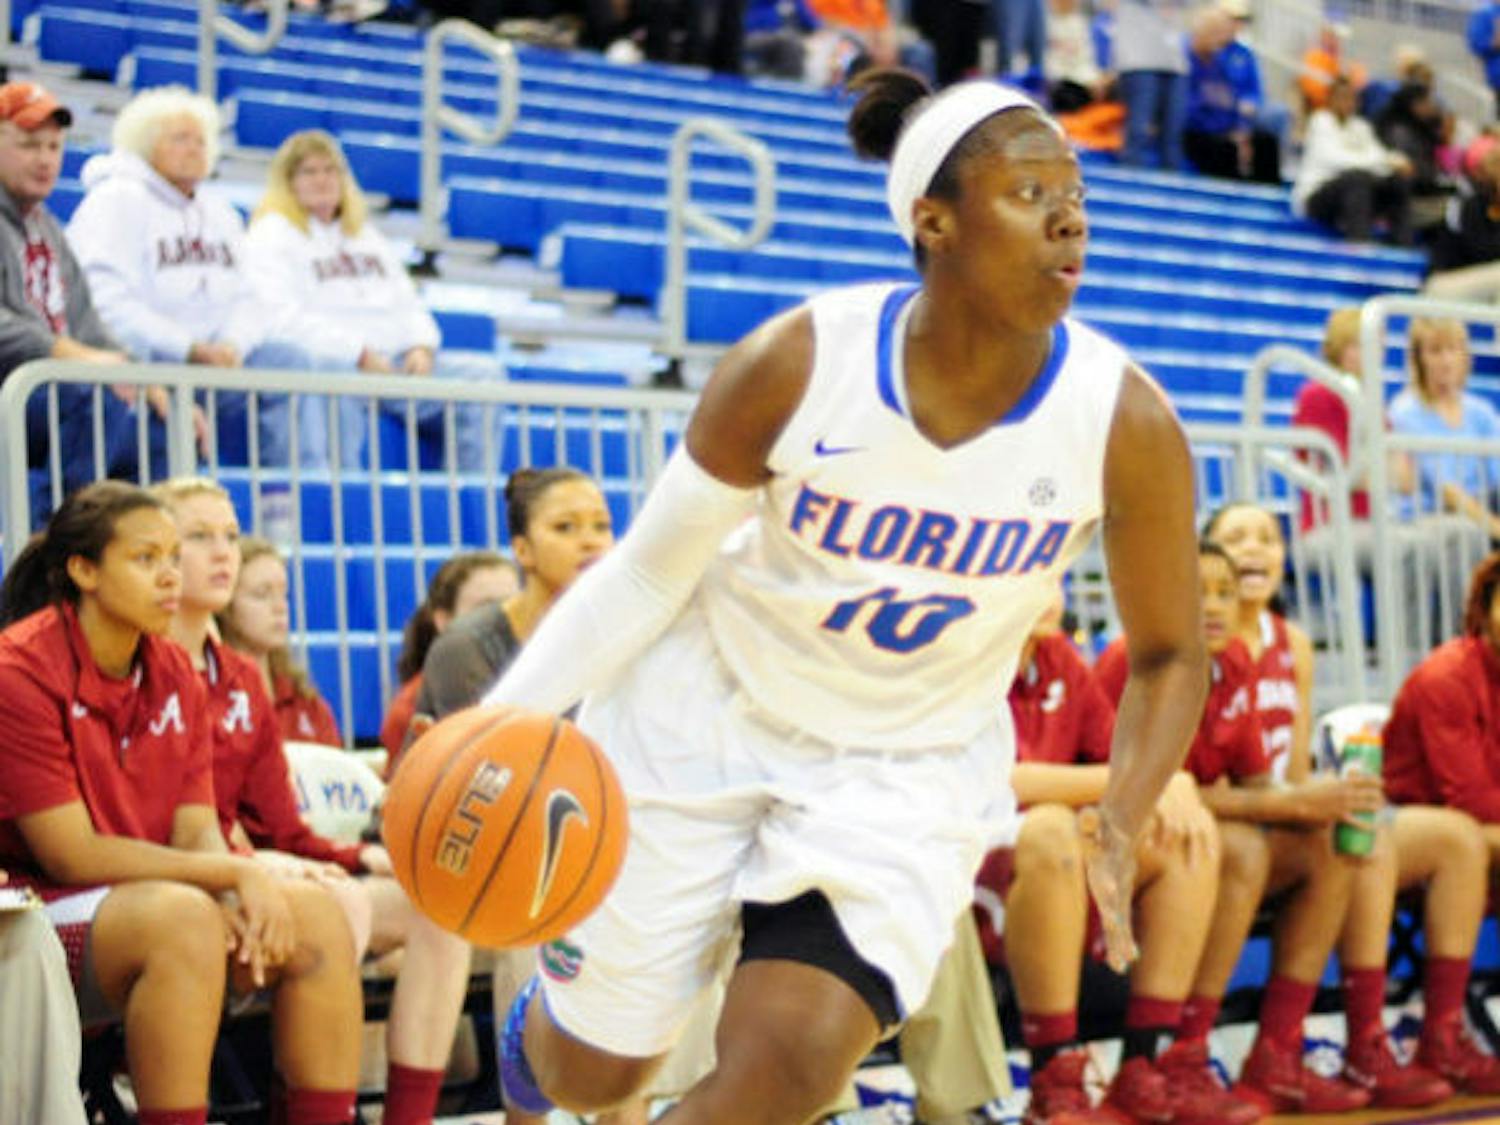 Jaterra Bonds drives the ball during Florida’s 75-67 win against Alabama on Jan. 30 in the O’Connell Center. Bonds led the Gators with seven rebounds against the Bulldogs on Sunday.